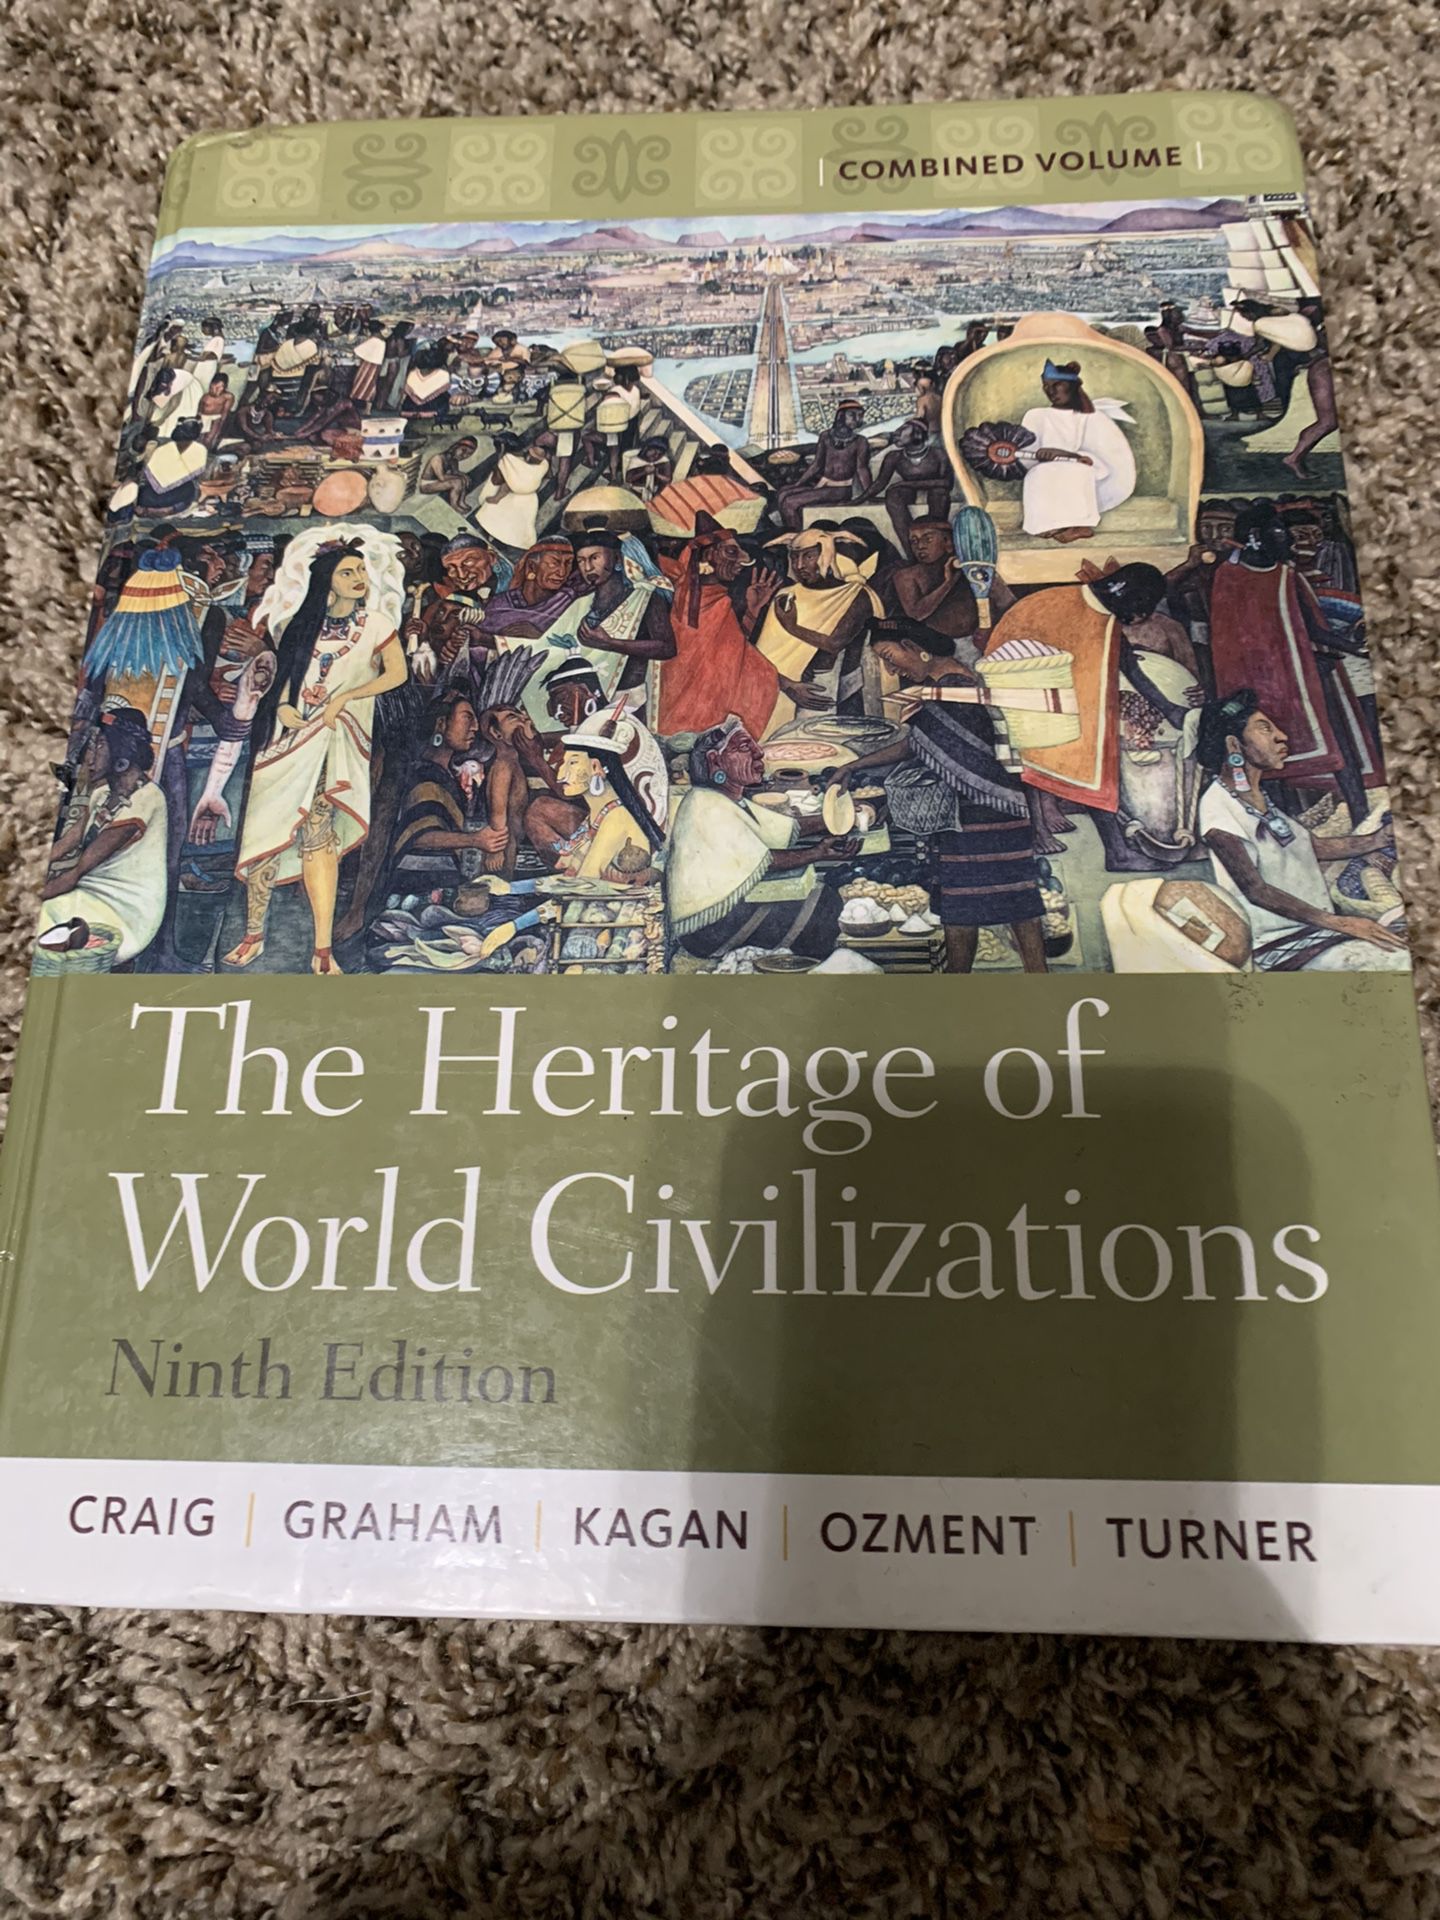 The Heritage of World Civilizations (9th Ed)